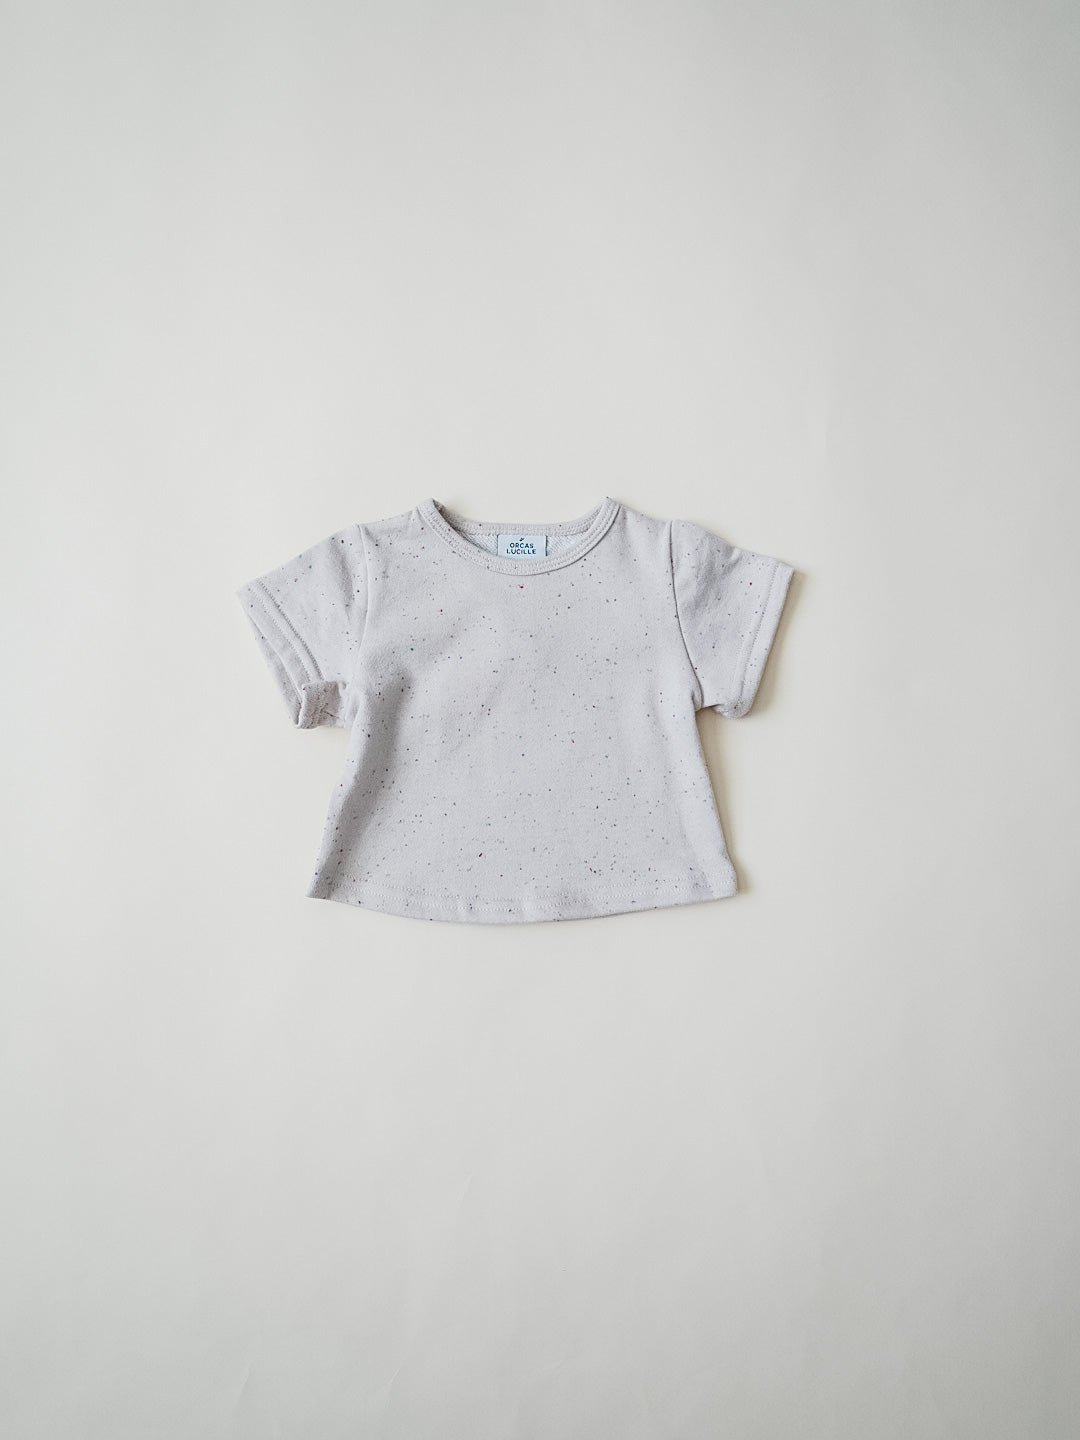 Speckled Tee - Beige | Imperfect - FINAL SALE - Orcas Lucille